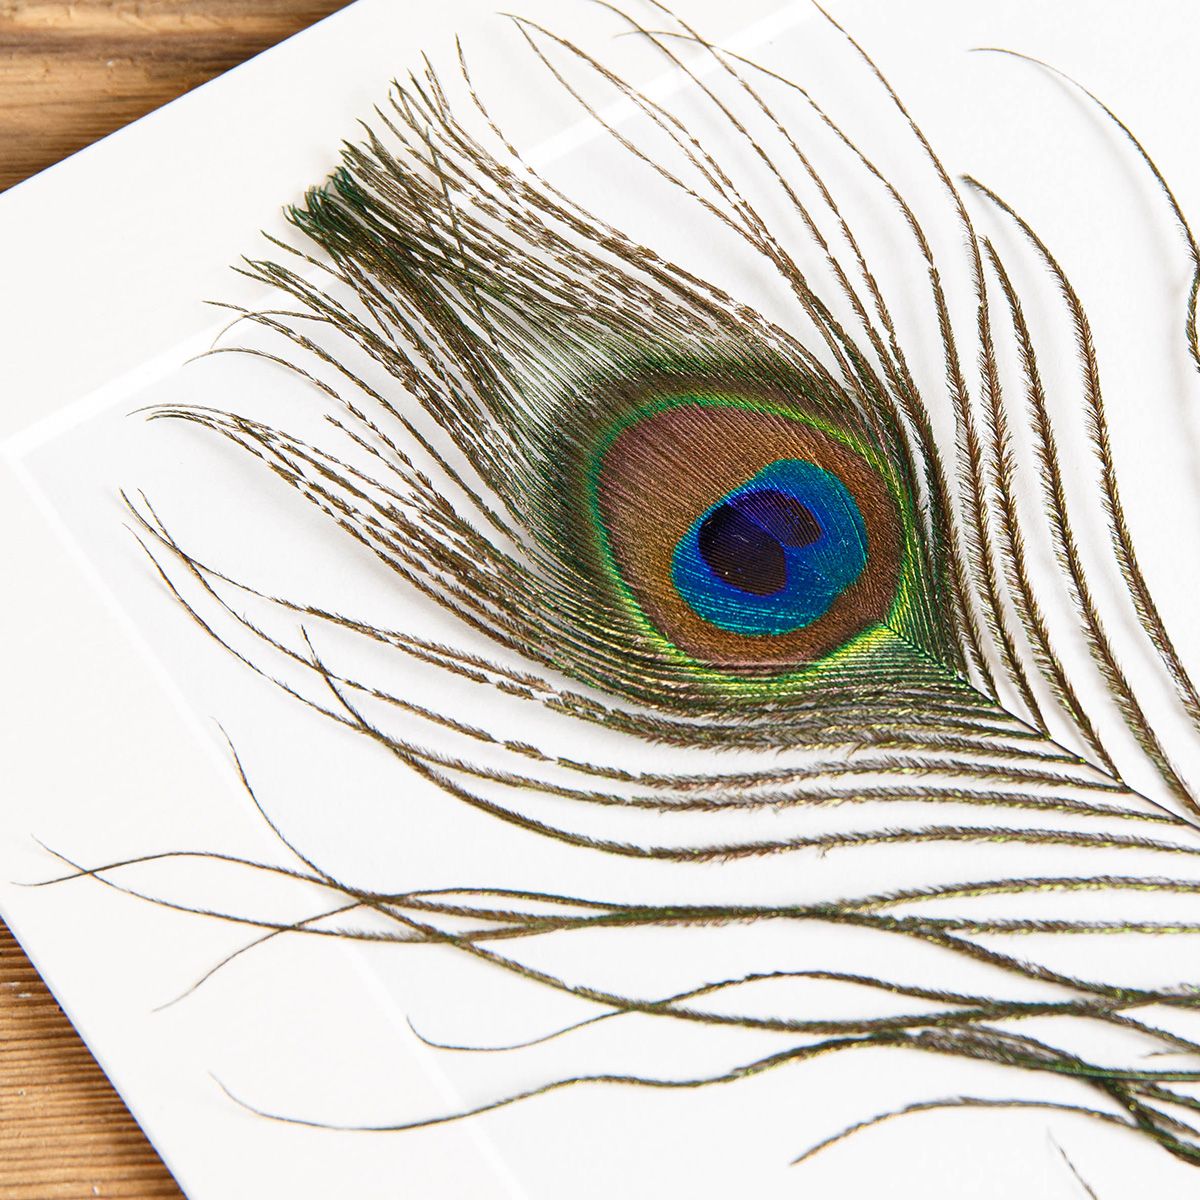 Peacock Feather from an Indian Peafowl in Box Frame (Pavo cristatus)